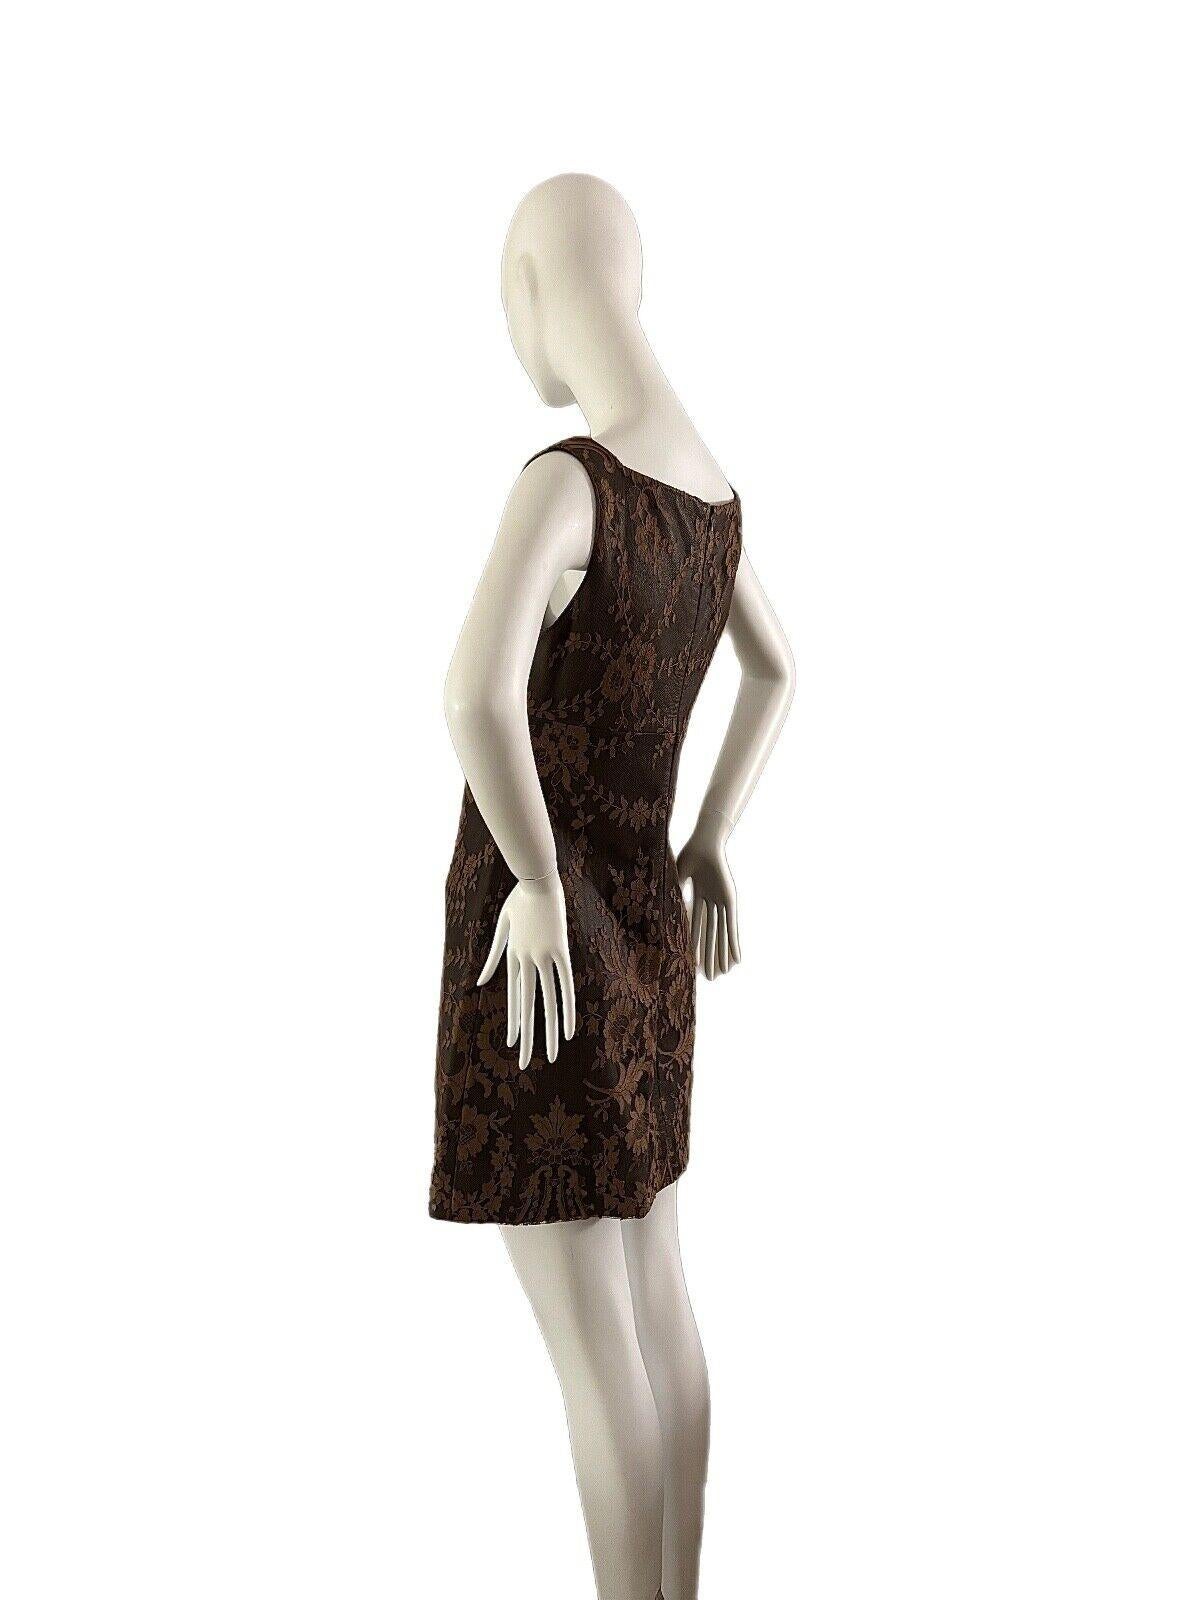 Women's GIANNI VERSACE 1996 vintage leather and lace brown mini dress For Sale